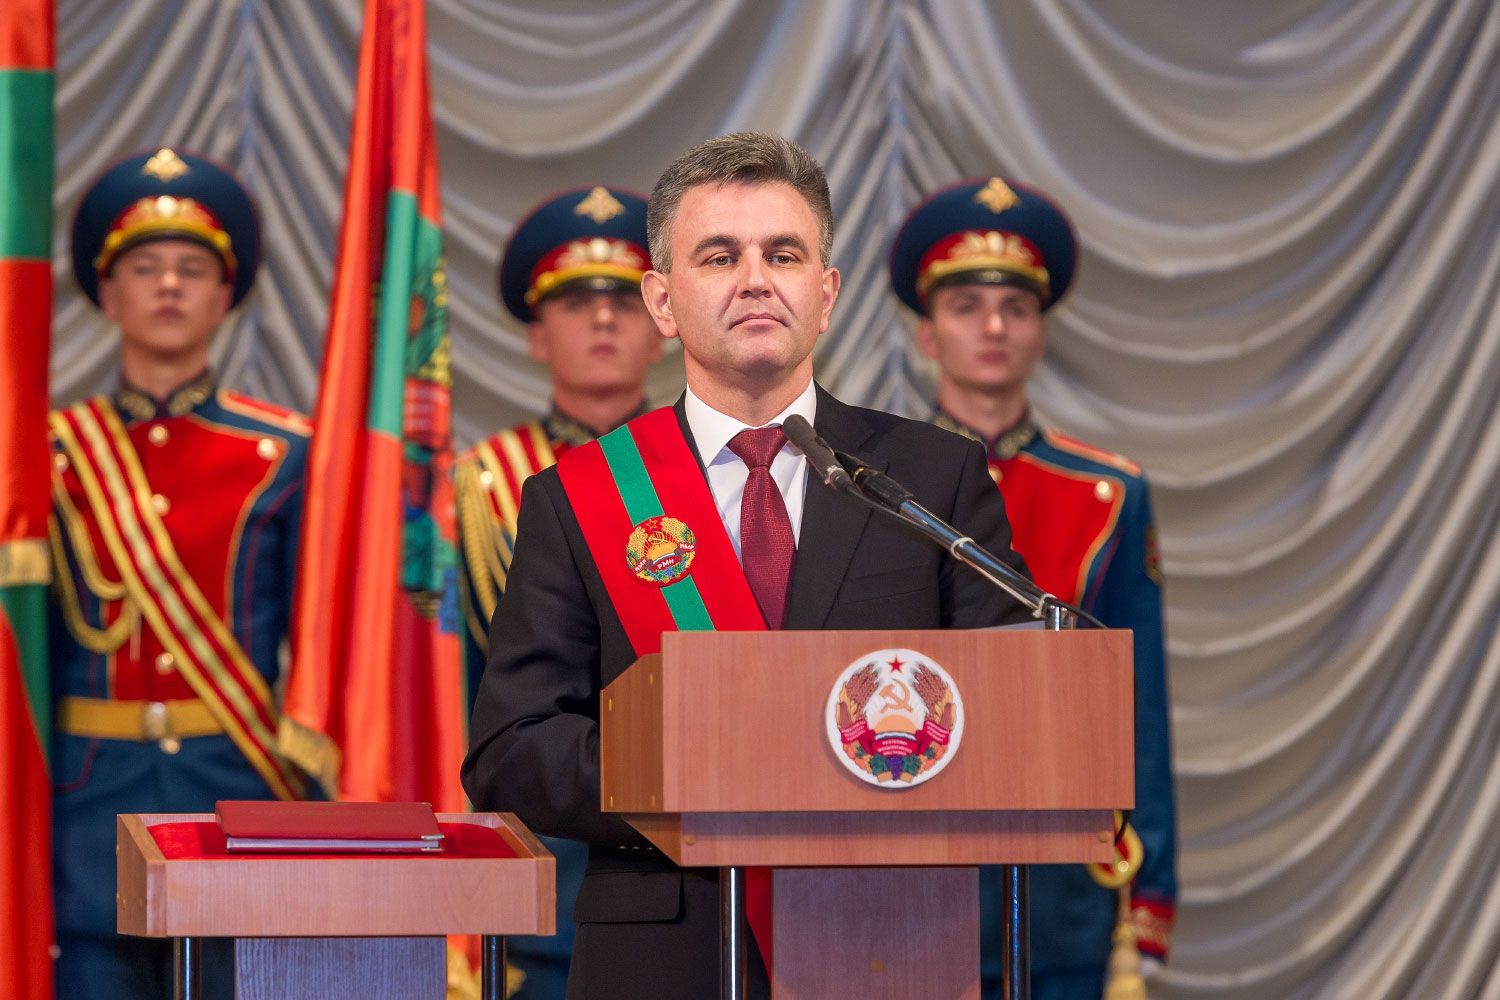 Vadim Krasnoselsky during his inauguration in 2016.